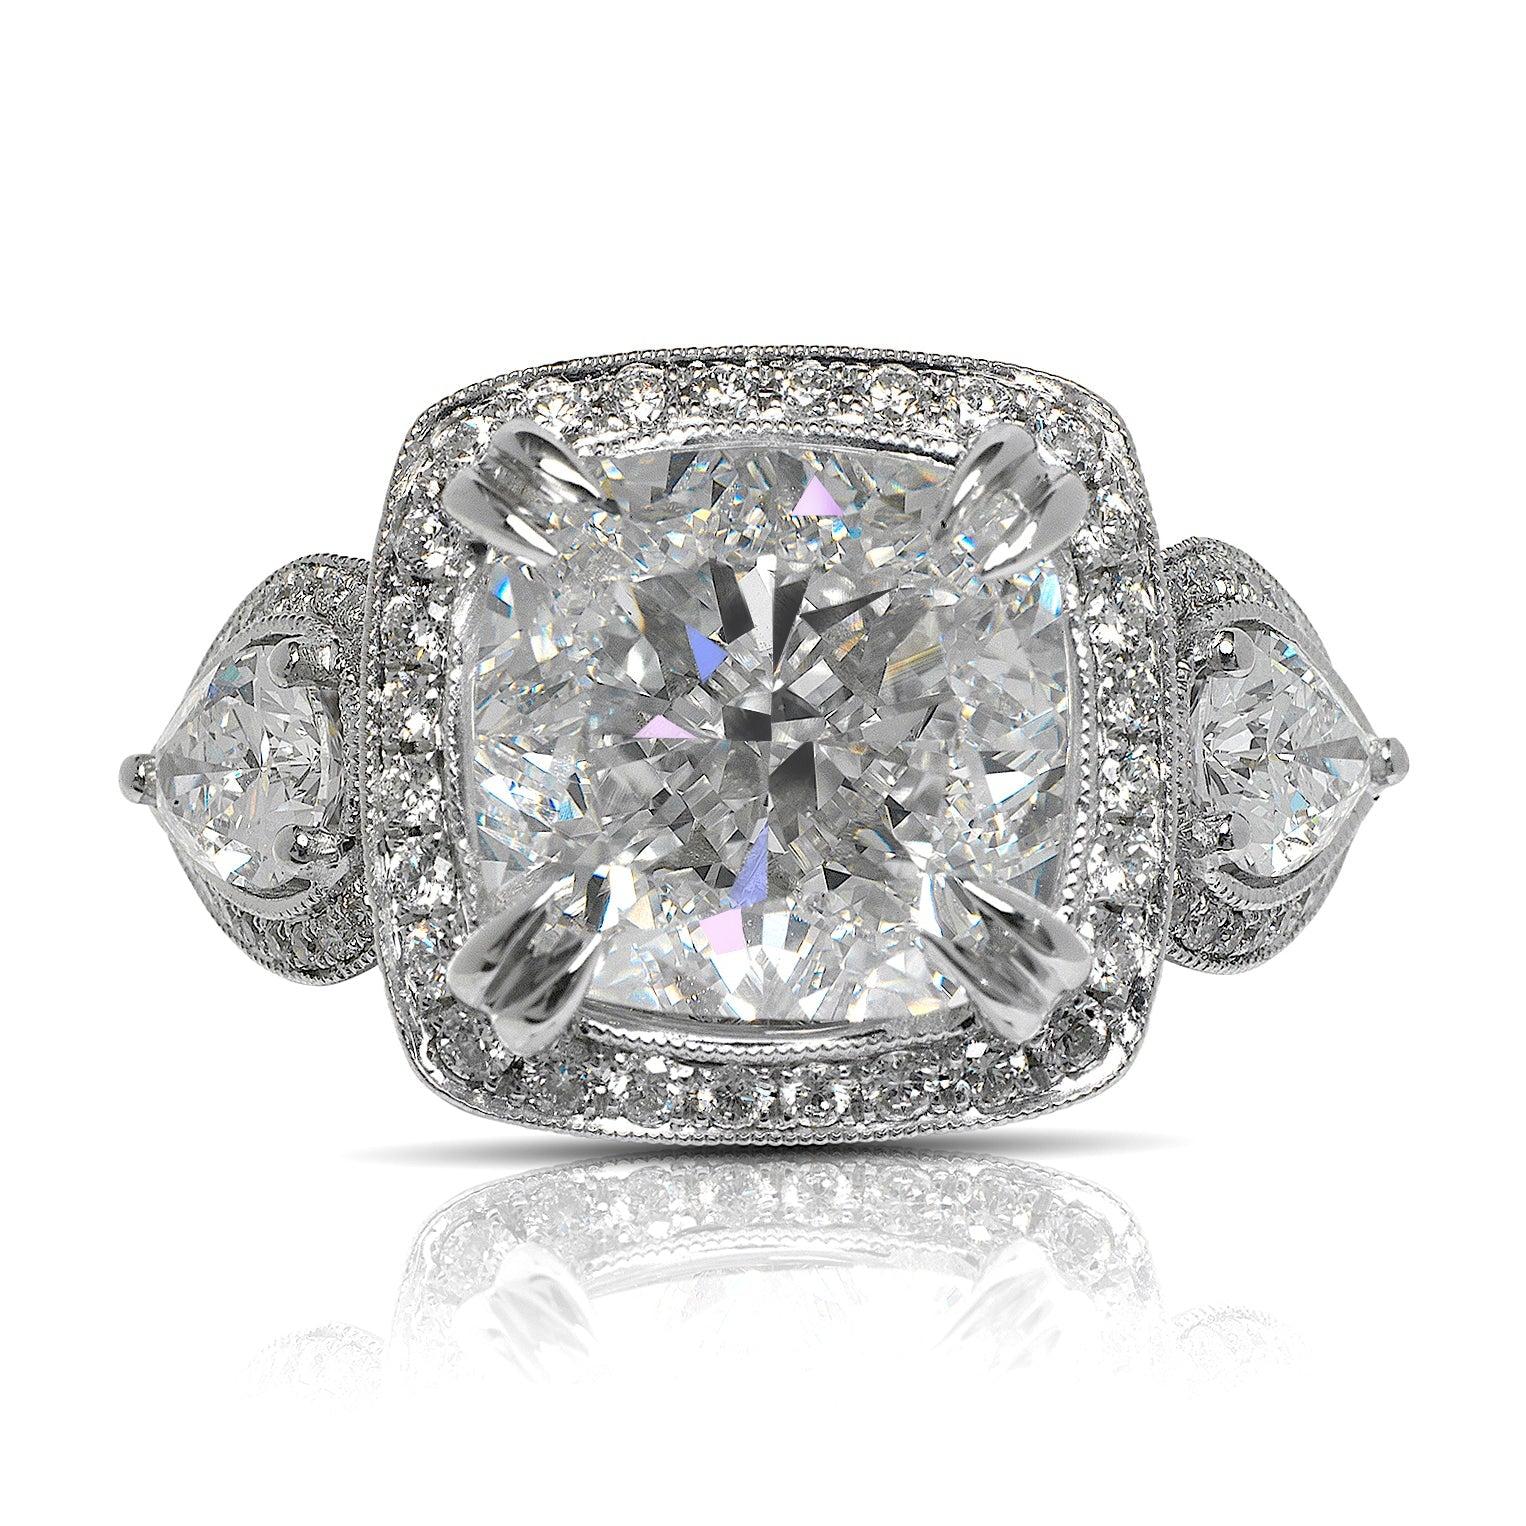 NALA CUSHION DIAMOND ENGAGEMENT RING 18K WHITE GOLD  
GIA CERTIFIED

Center Diamond
Carat Weight: 6 Carats
Color :   F*
Clarity:  VVS1
Cut: CUSHION MODIFIED BRILLIANT
Approximate Measurements 10.0 x 9.7 x 6.6 mm
* This diamond has been treated by